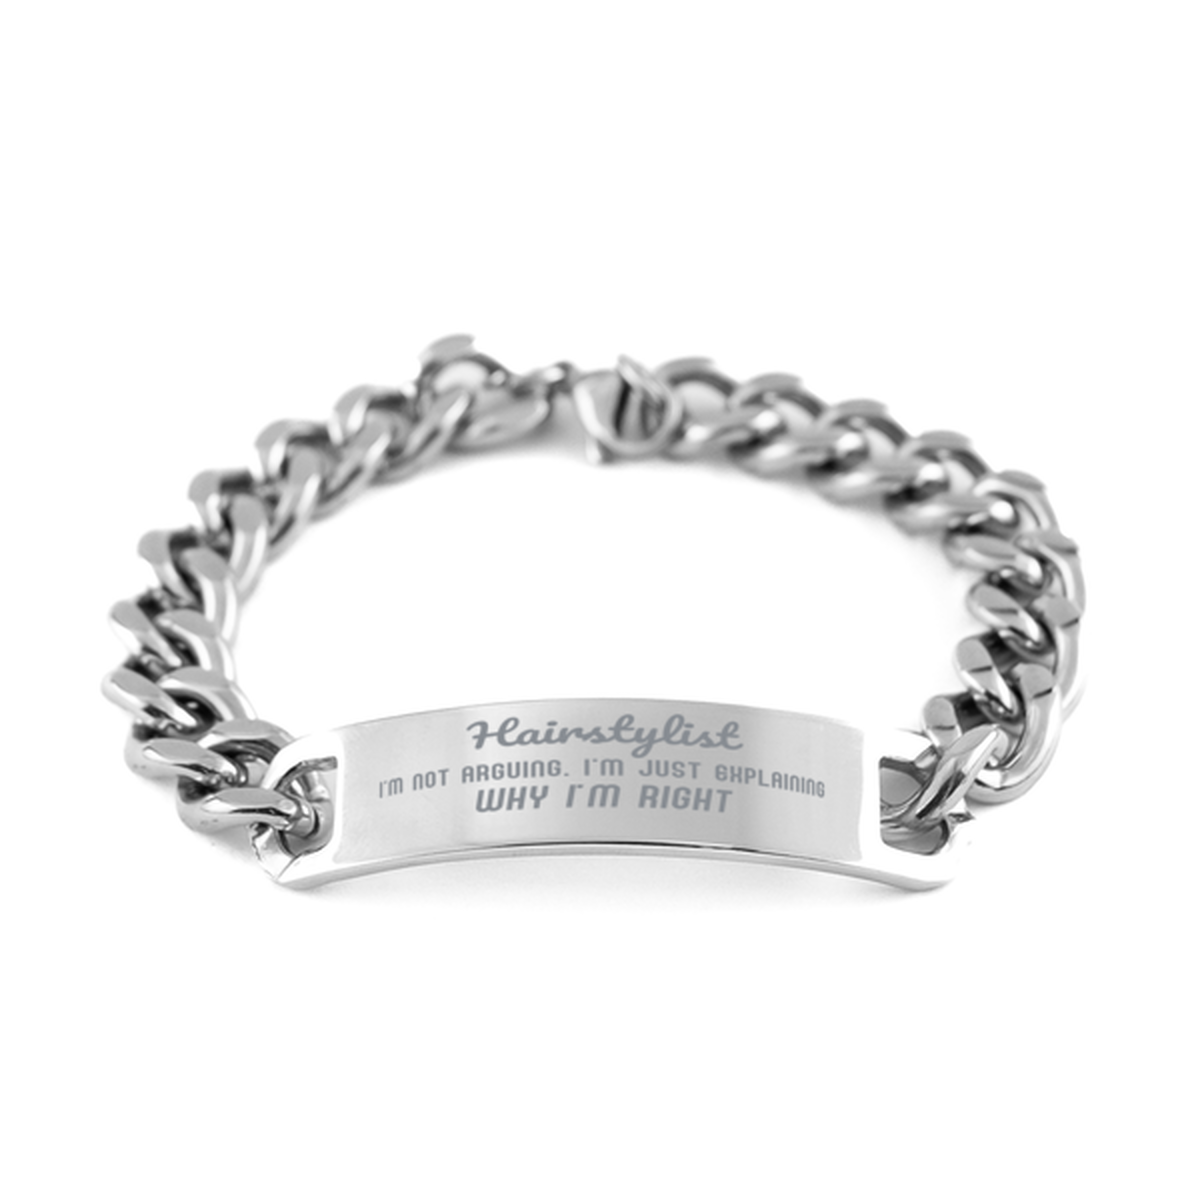 Hairstylist I'm not Arguing. I'm Just Explaining Why I'm RIGHT Cuban Chain Stainless Steel Bracelet, Graduation Birthday Christmas Hairstylist Gifts For Hairstylist Funny Saying Quote Present for Men Women Coworker